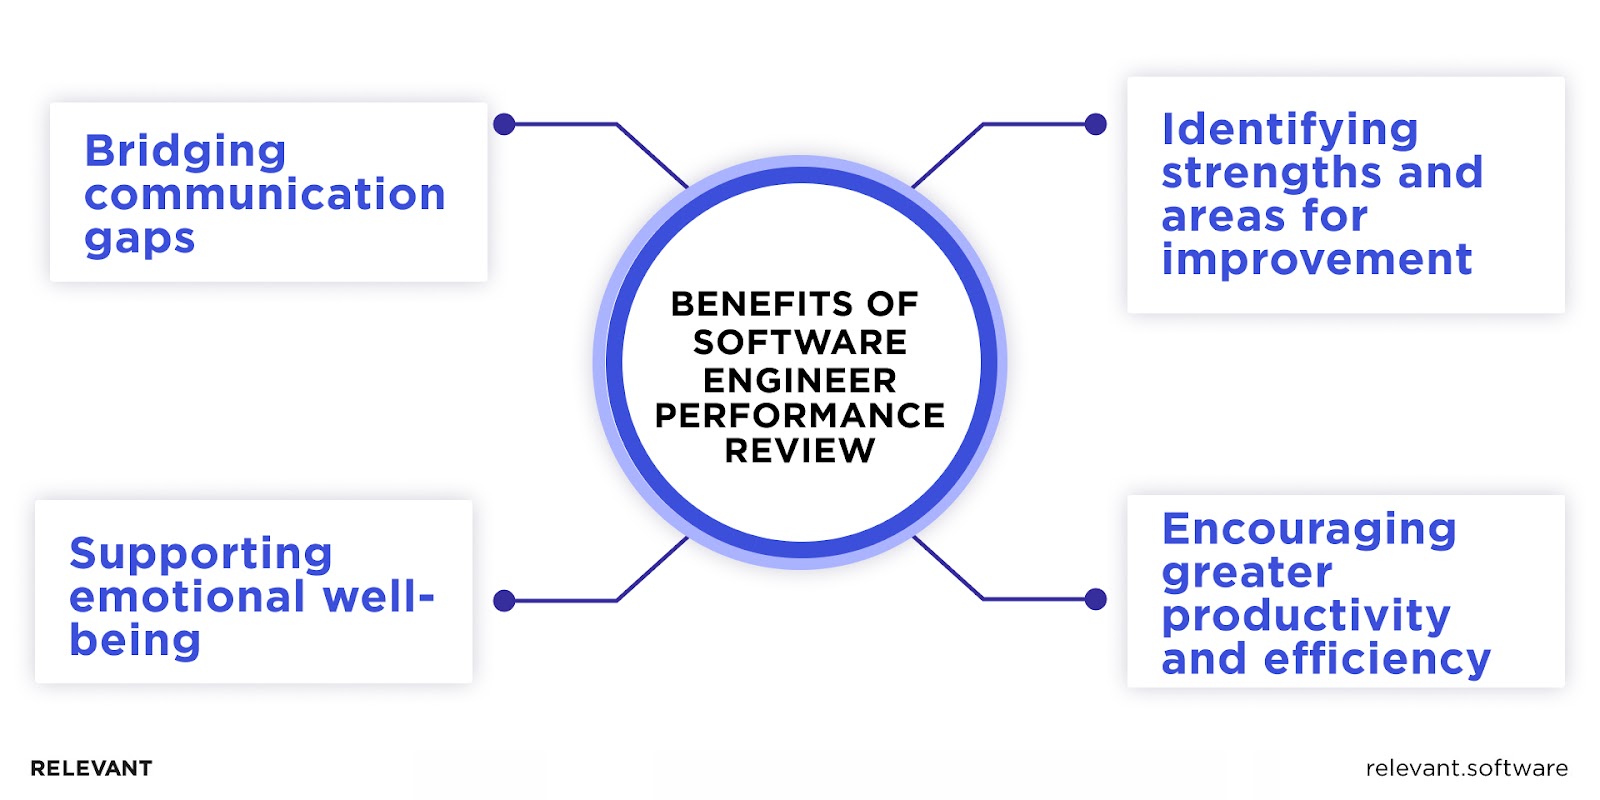 Benefits of Software Engineer Performance Review